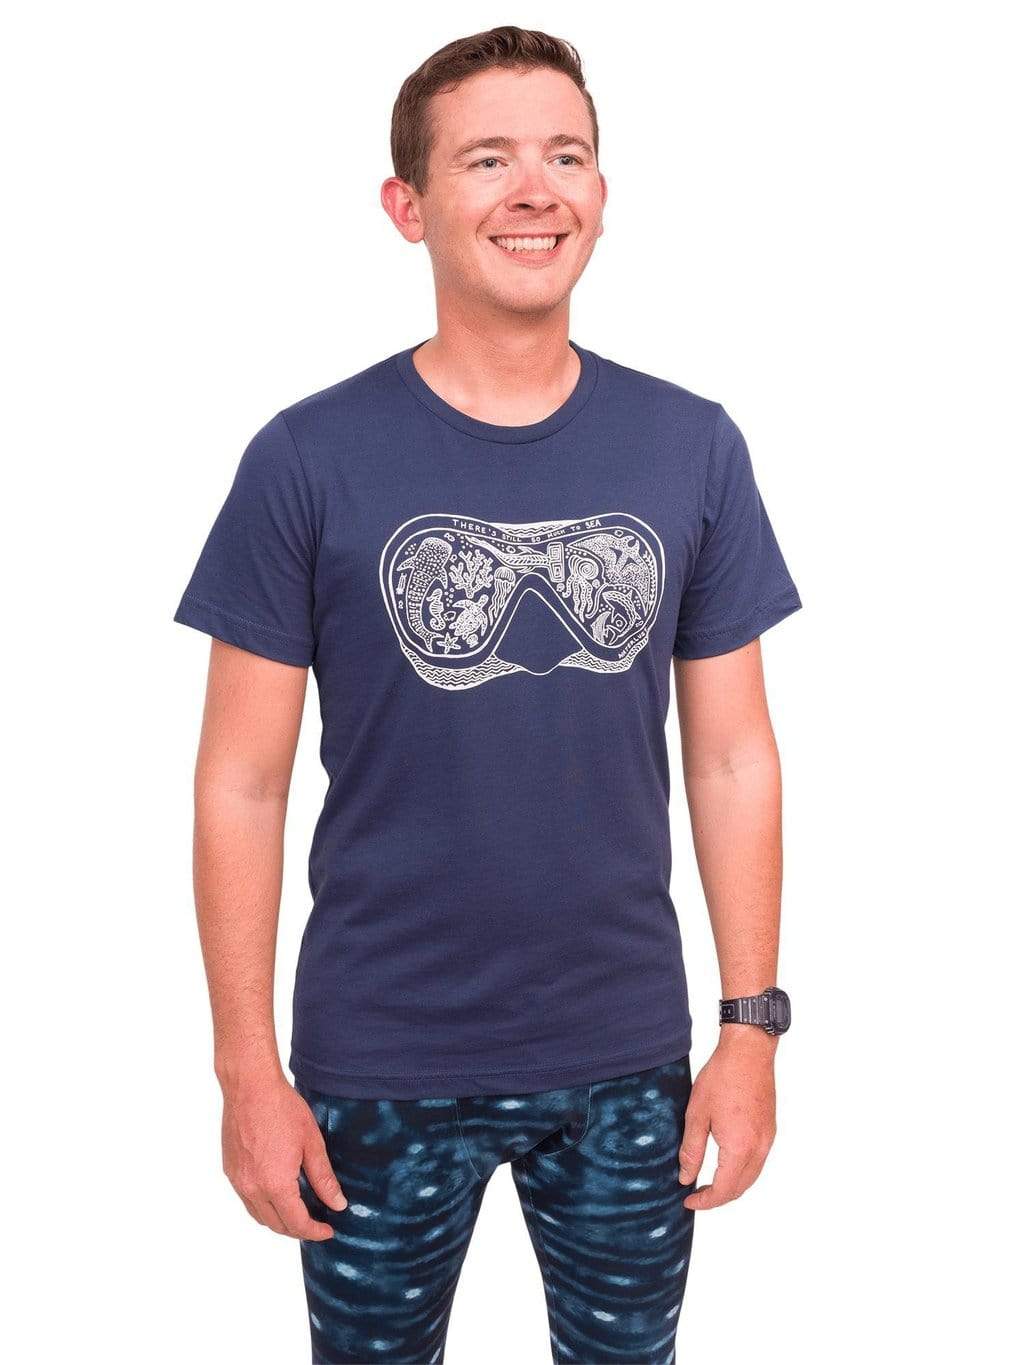 Model: Joe is a coral restoration ecologist and an avid runner. He is 5&#39;10&quot;, 145lbs and wearing a size S tee.